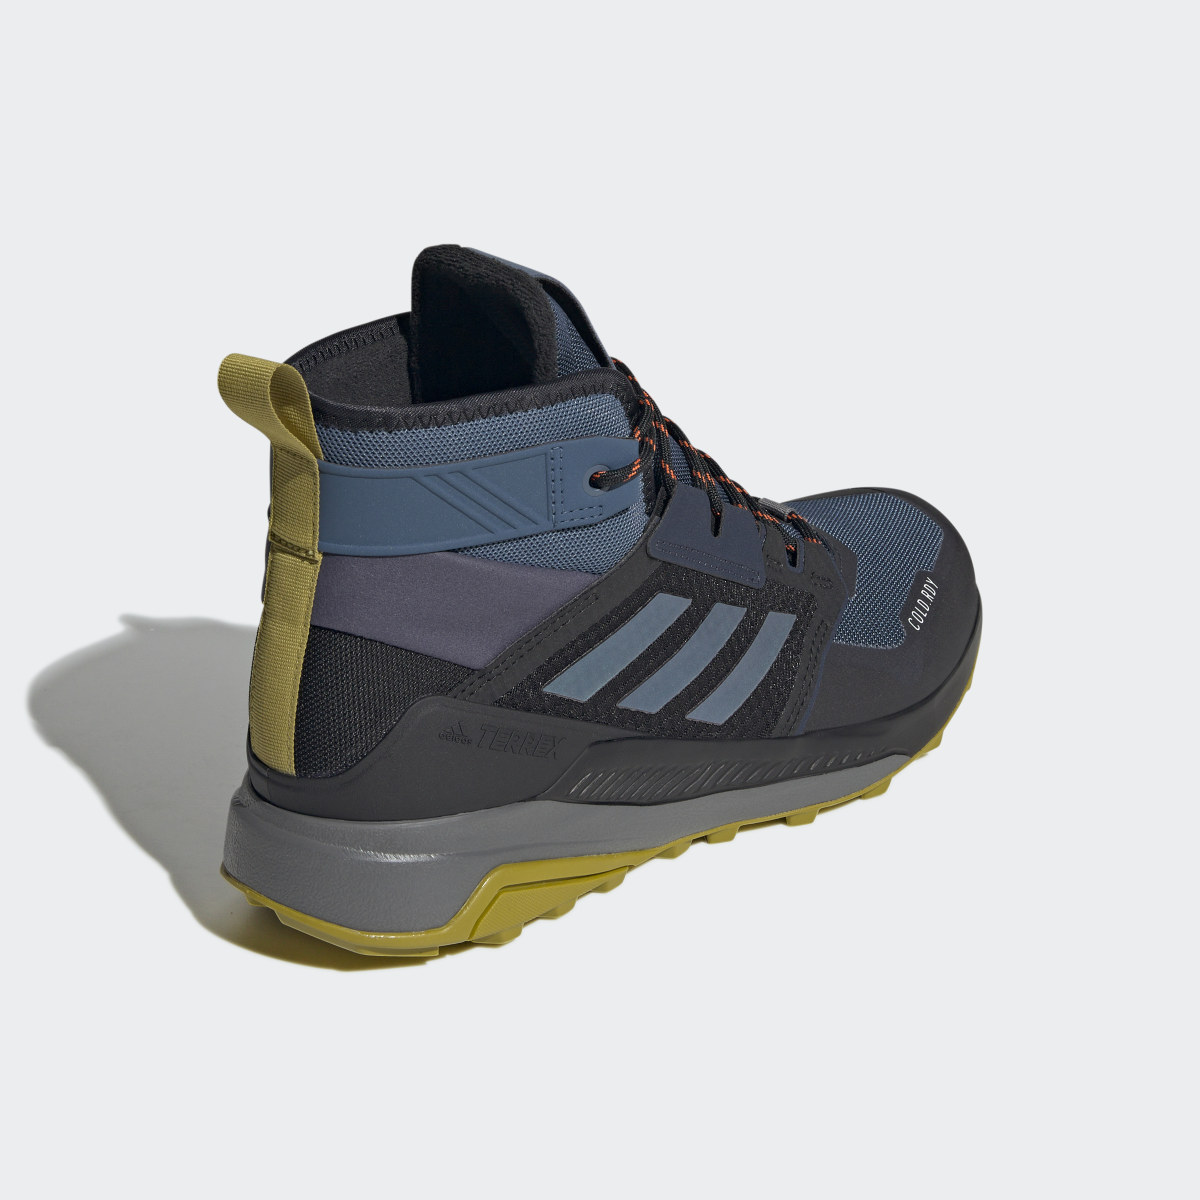 Adidas Terrex Trailmaker Mid COLD.RDY Hiking Boots. 6